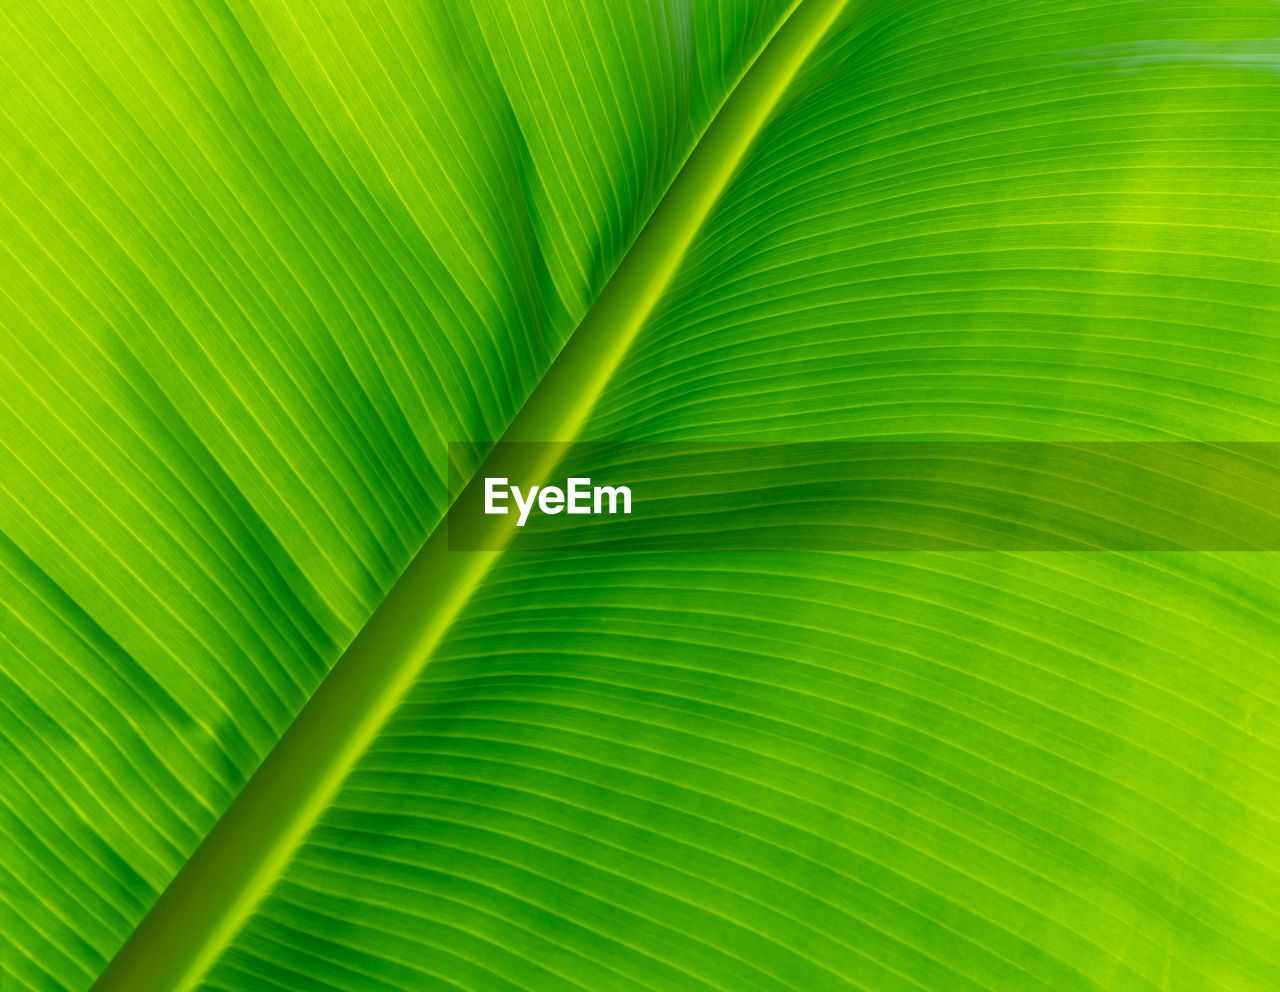 green, leaf, plant part, palm tree, backgrounds, palm leaf, banana leaf, yellow, tropical climate, full frame, no people, close-up, beauty in nature, pattern, plant, nature, textured, leaf vein, frond, grass, line, tree, growth, flower, sunlight, freshness, botany, macro, environment, vibrant color, abstract, outdoors, fragility, extreme close-up, striped, circle, leaves, lush foliage, abstract backgrounds